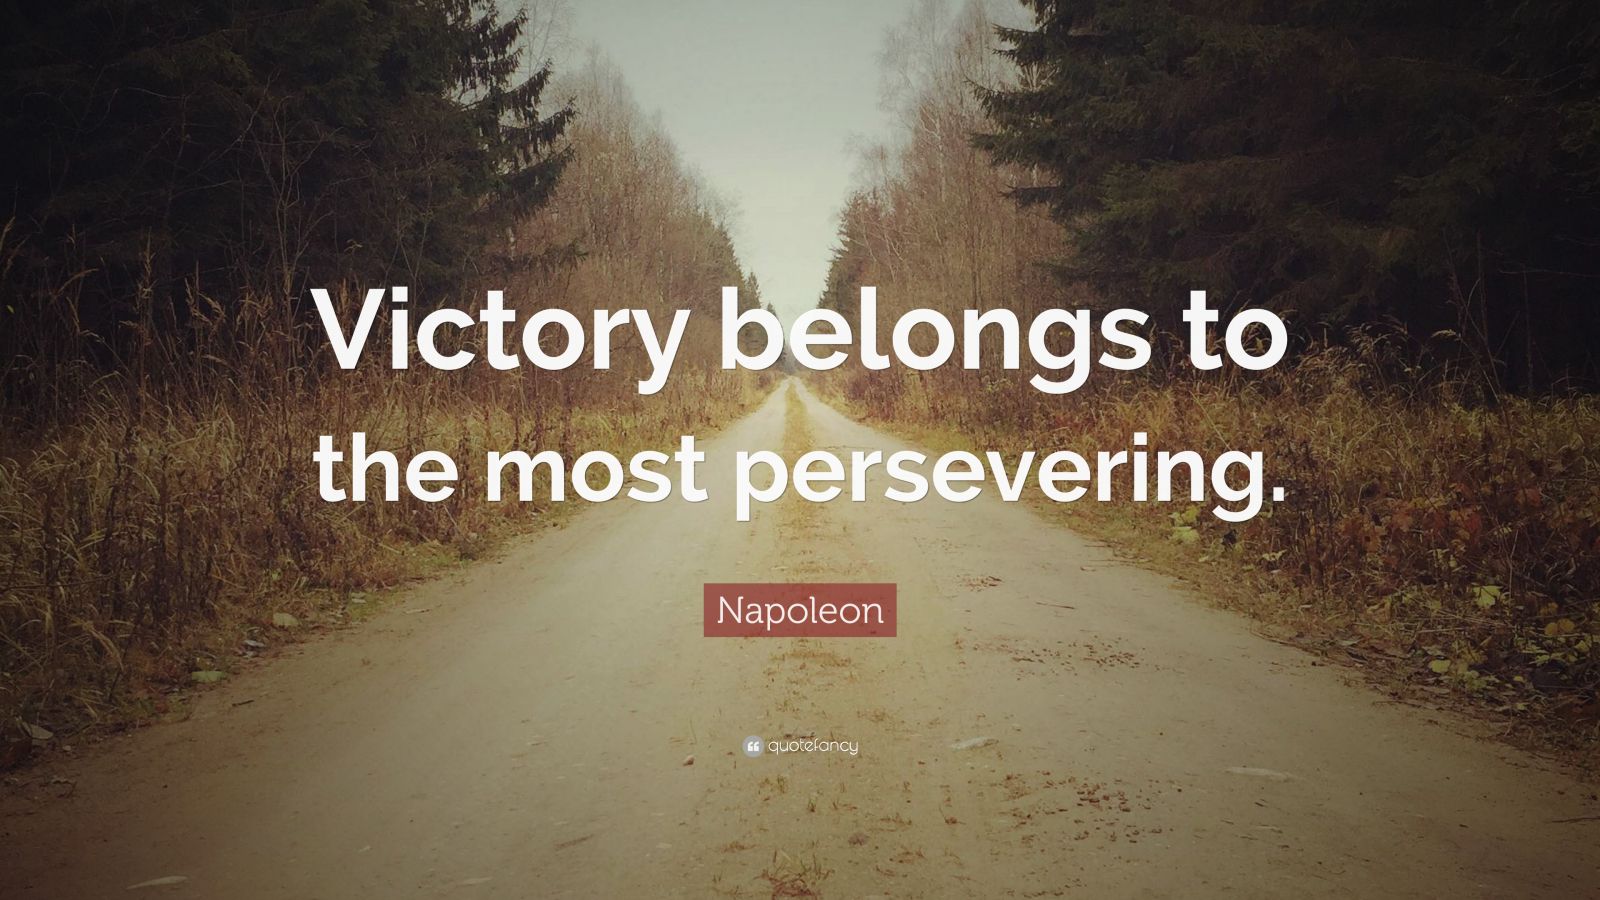 Napoleon Quote: “Victory belongs to the most persevering.” (23